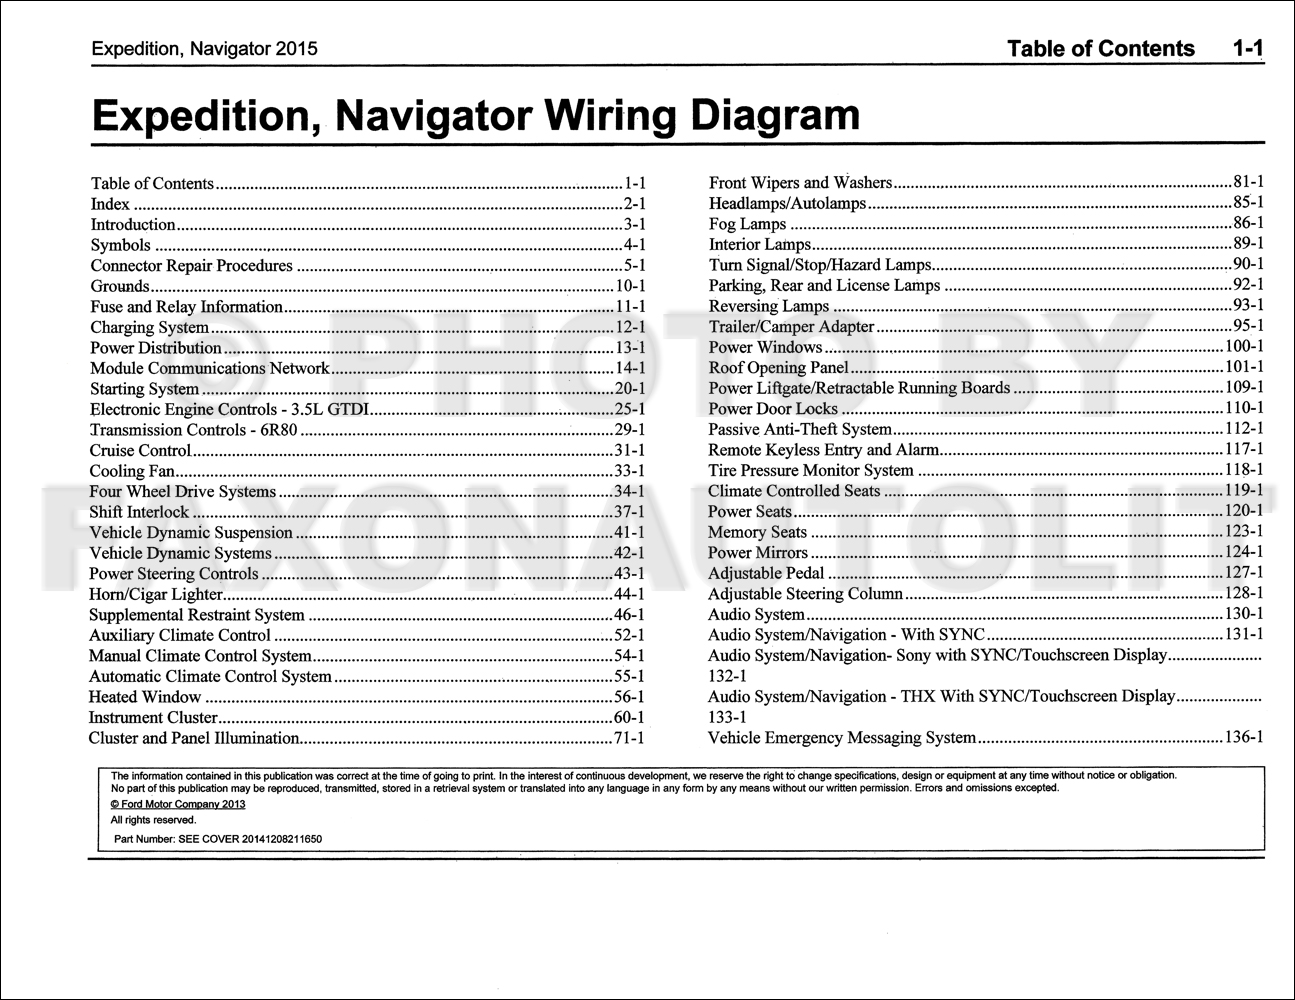 2015 Ford Expedition Lincoln Navigator Wiring Diagram